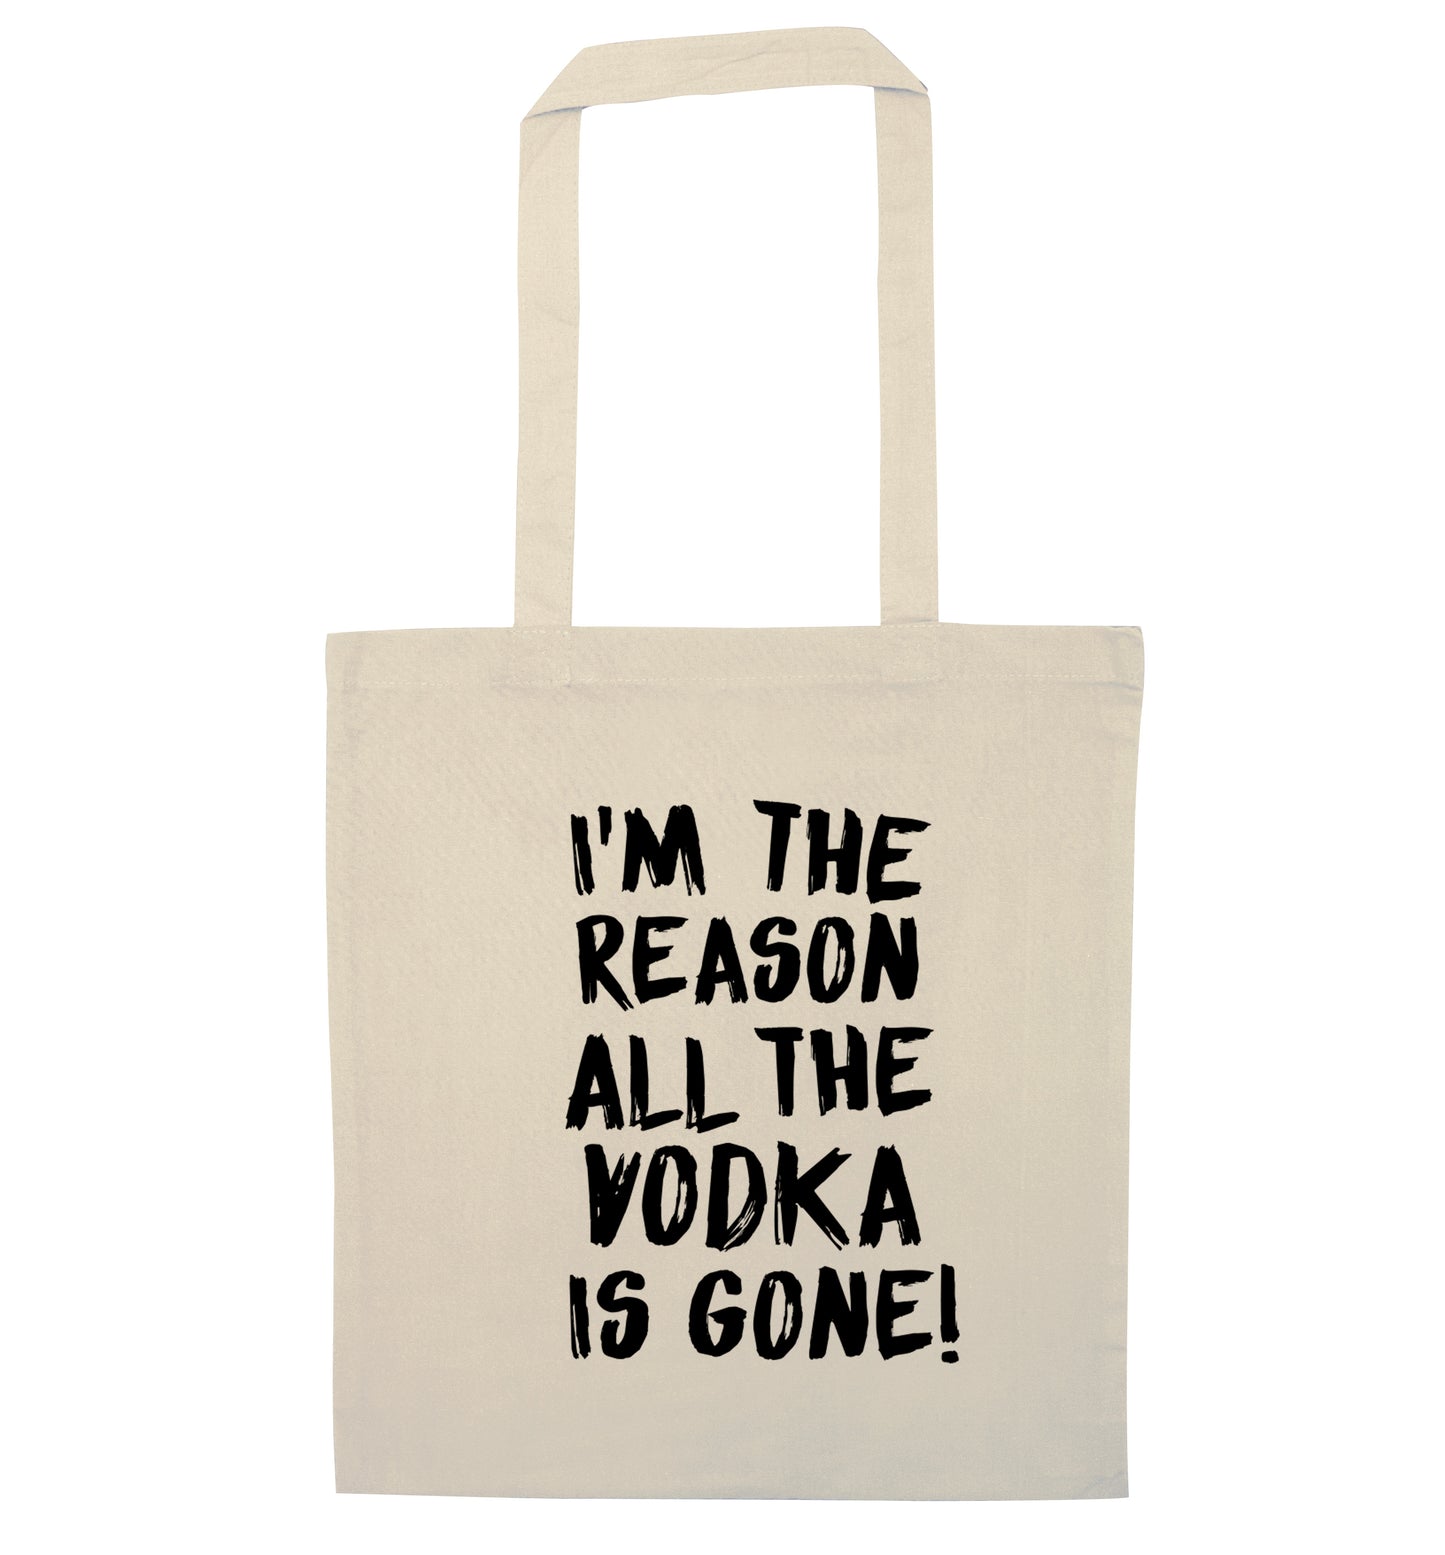 I'm the reason all the tequila is gone natural tote bag